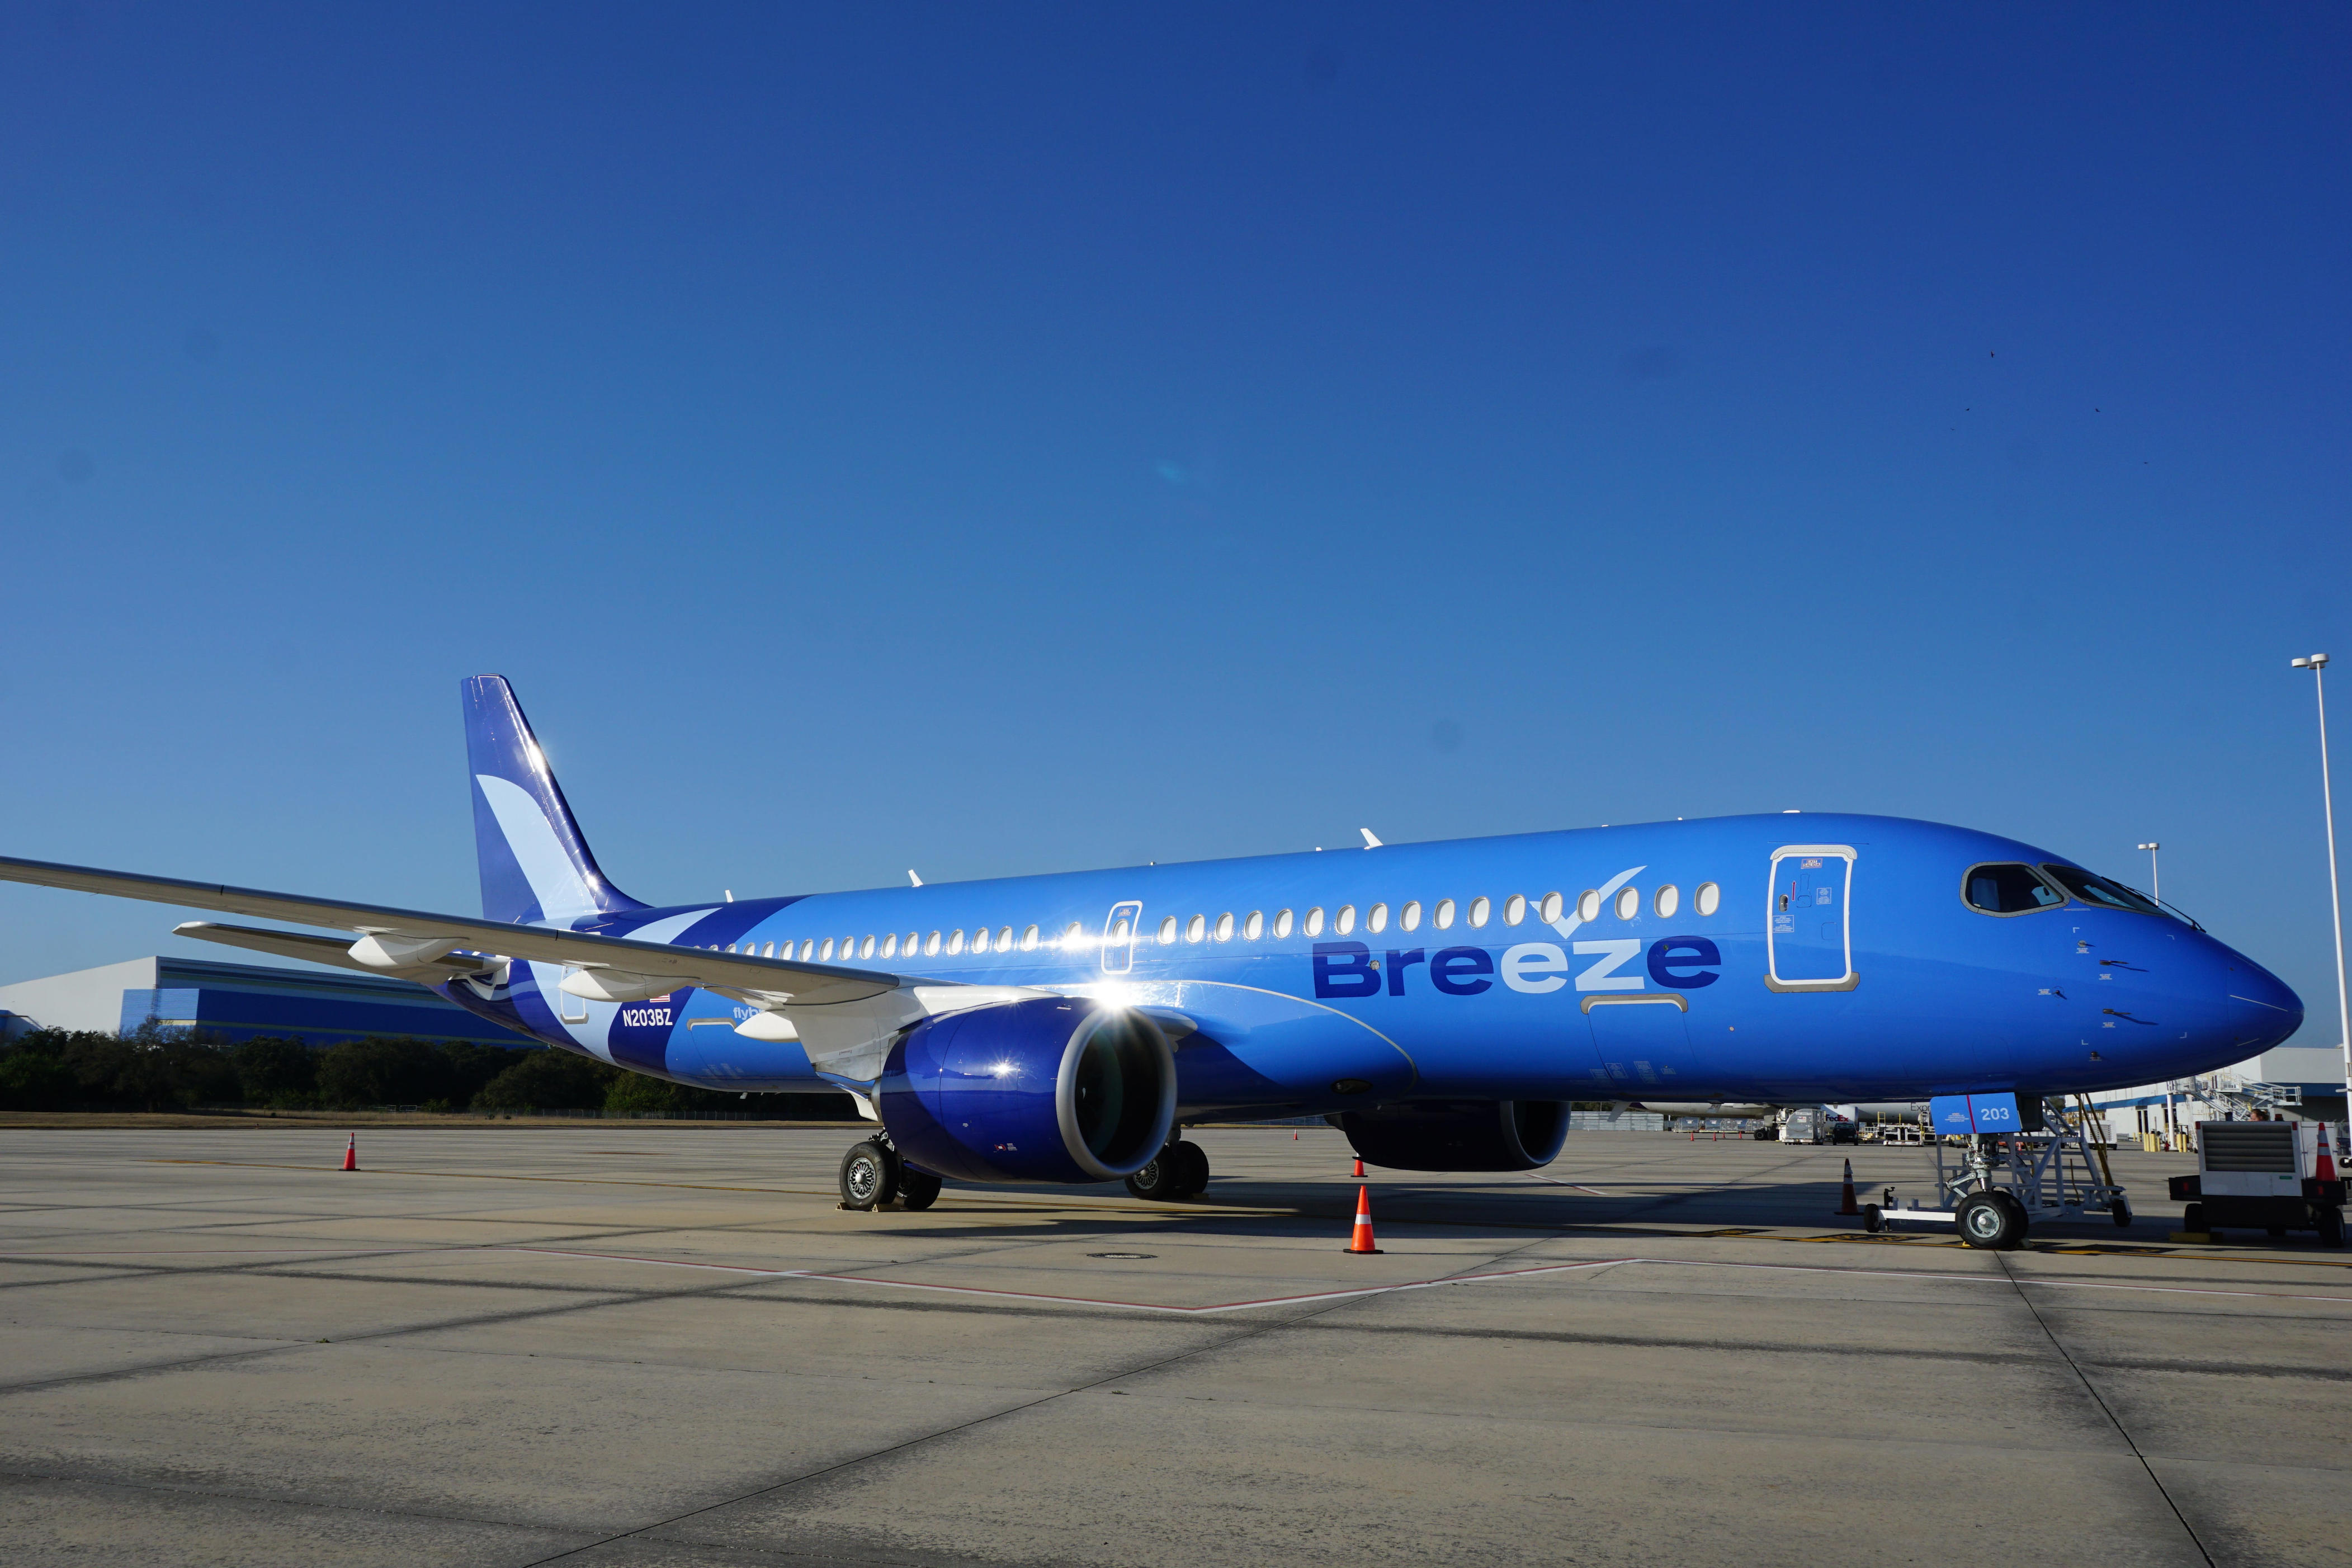 From coast to coast: Breeze Airways expands to Orange County, CEO talks trends